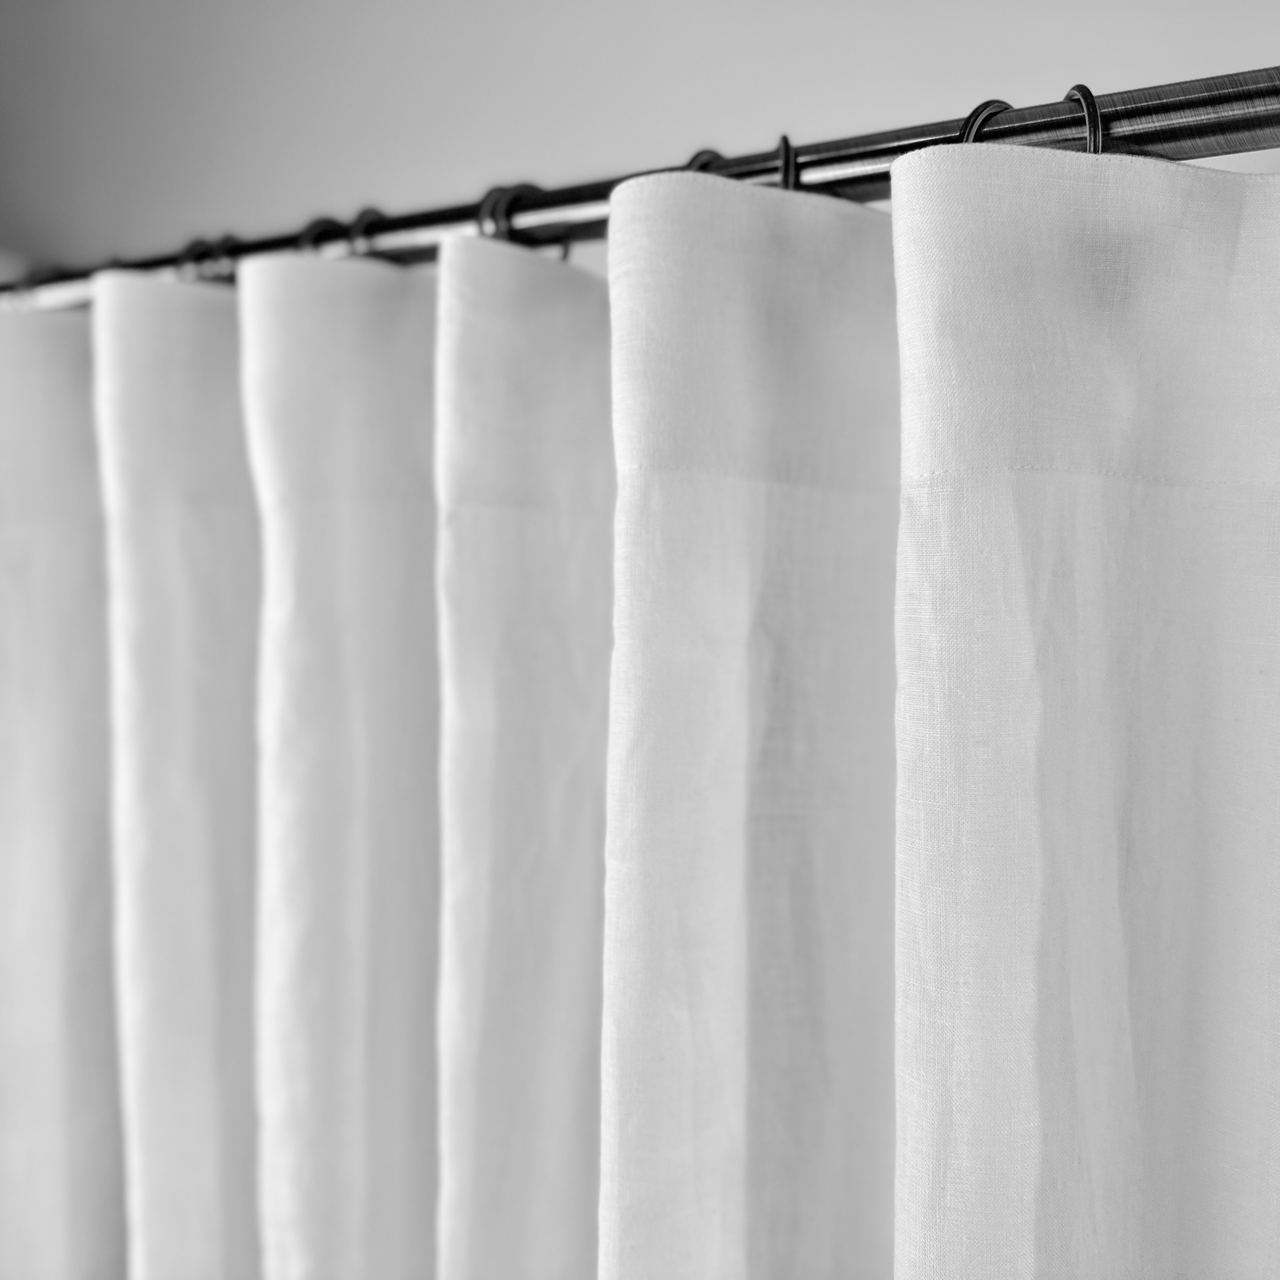 S-fold Linen Curtain Panel - Suitable for Rings and Hooks or Tracks -